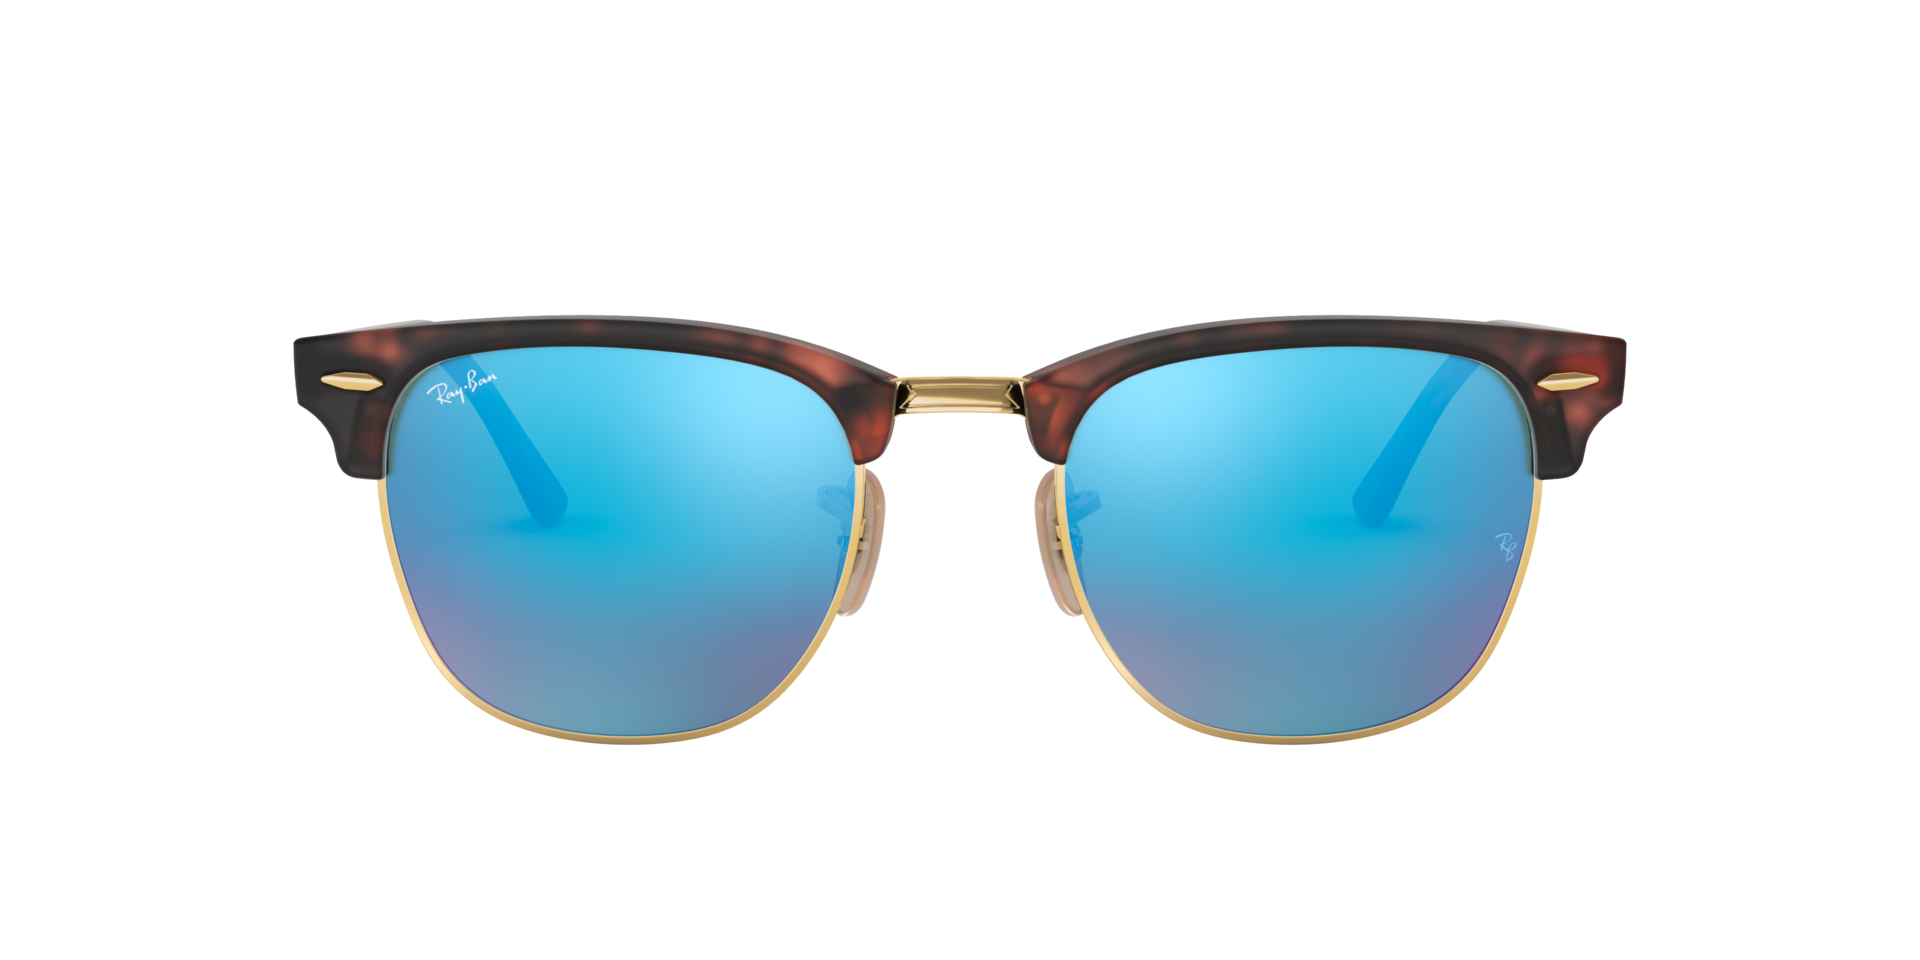 Ray Ban Clubmaster Sonnenbrille RB3016 114517 49